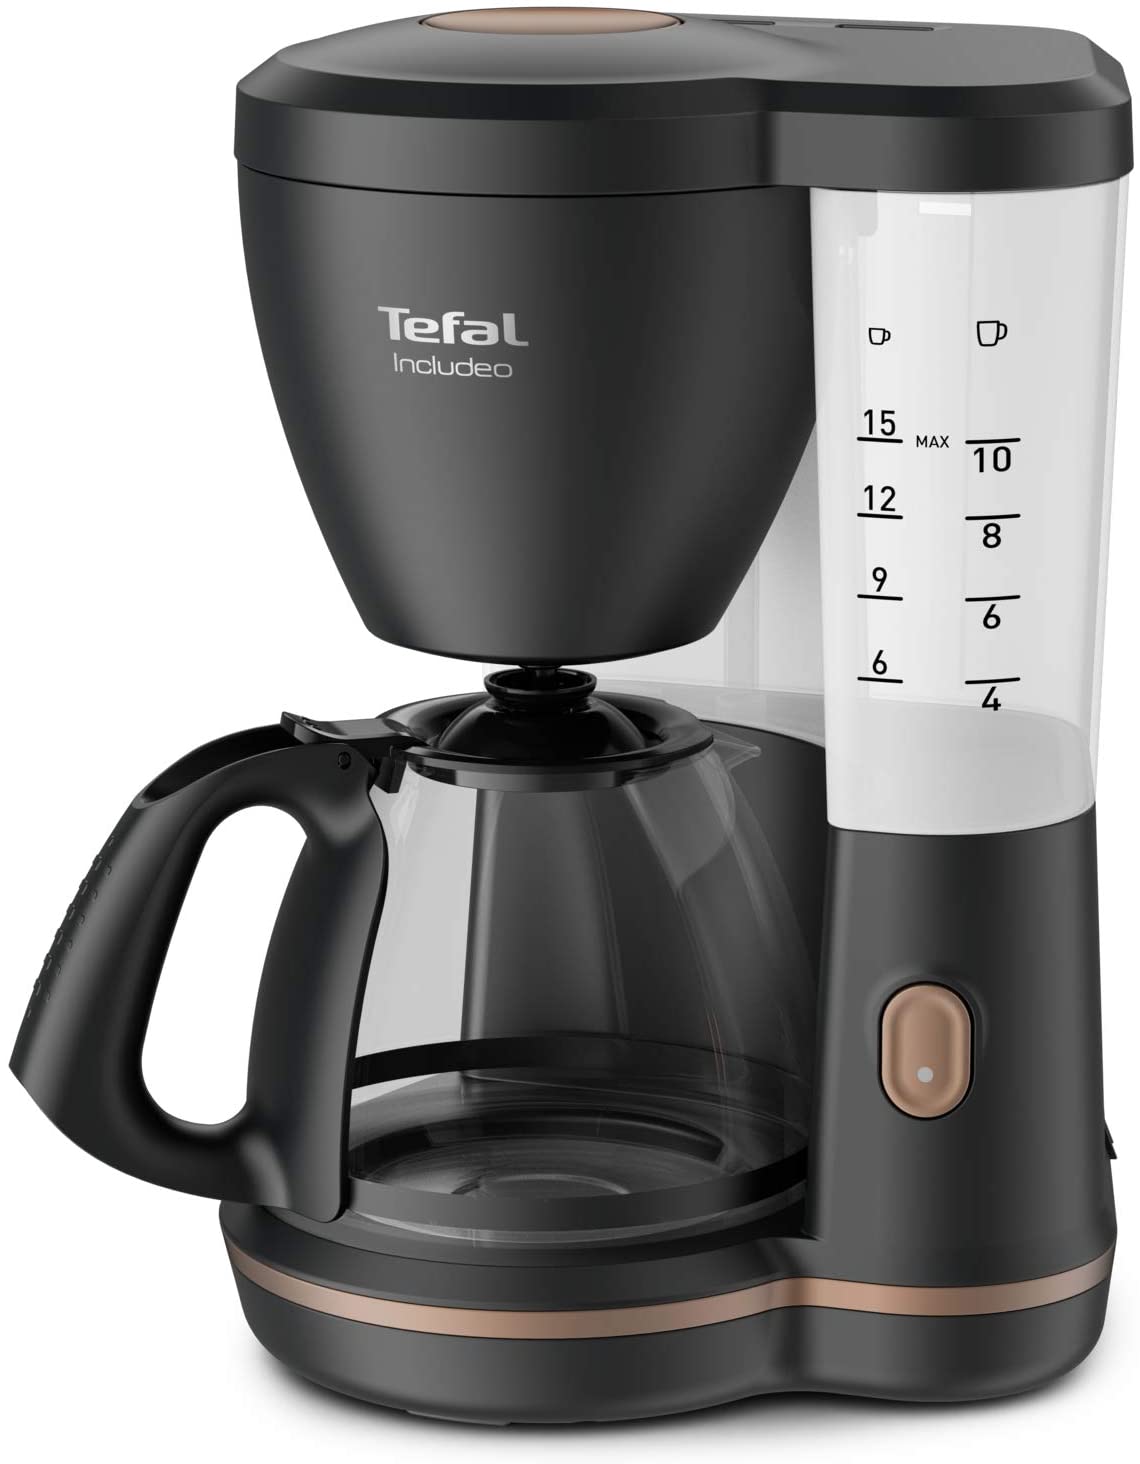 Filter coffee machine including Tefal, a coffee machine extremely easy to u